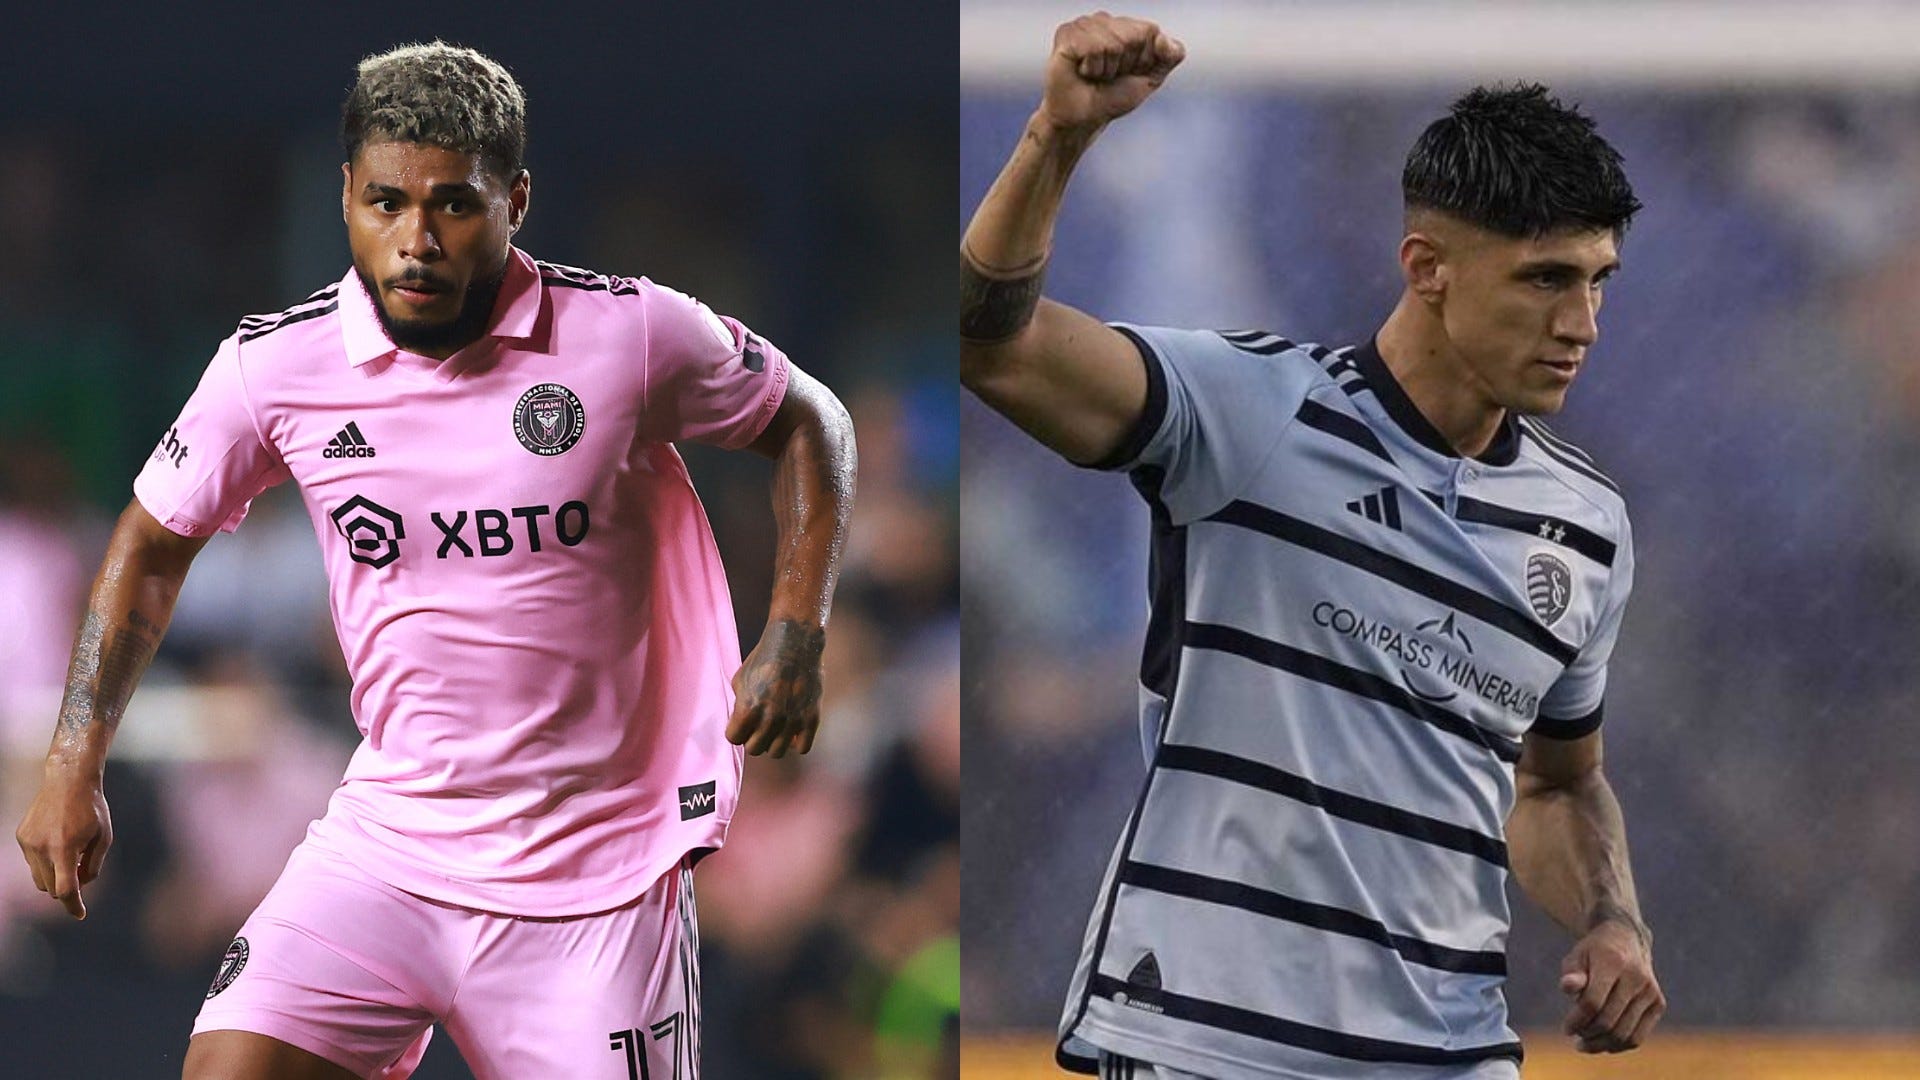 Inter Miami vs Sporting Kansas City Live stream, TV channel, kick-off time and where to watch Goal US